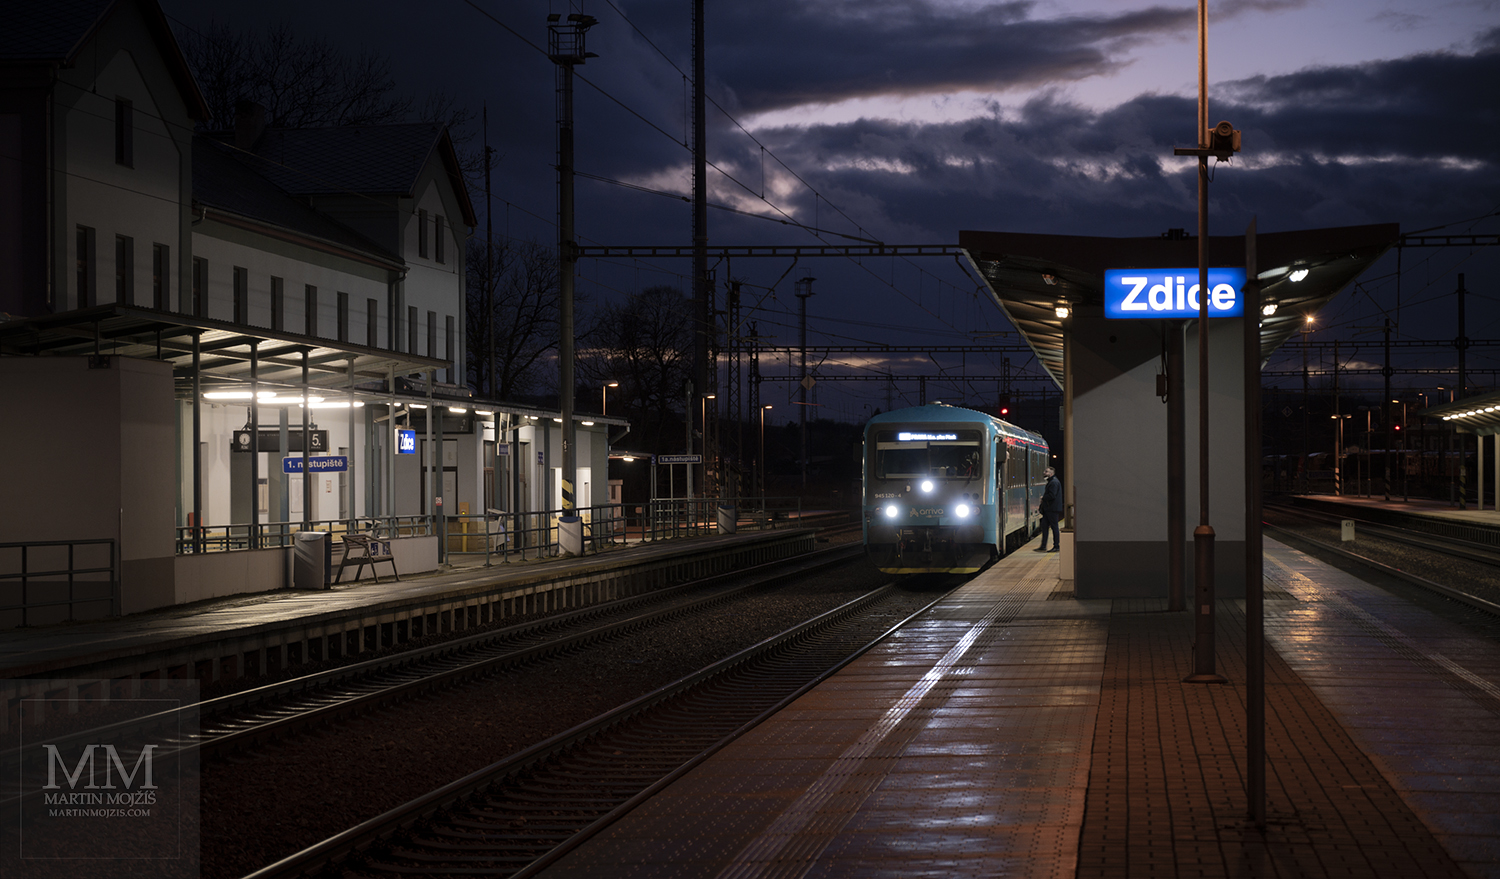 Zdice railway station, Arriva engine train ready to depart in the direction Beroun.